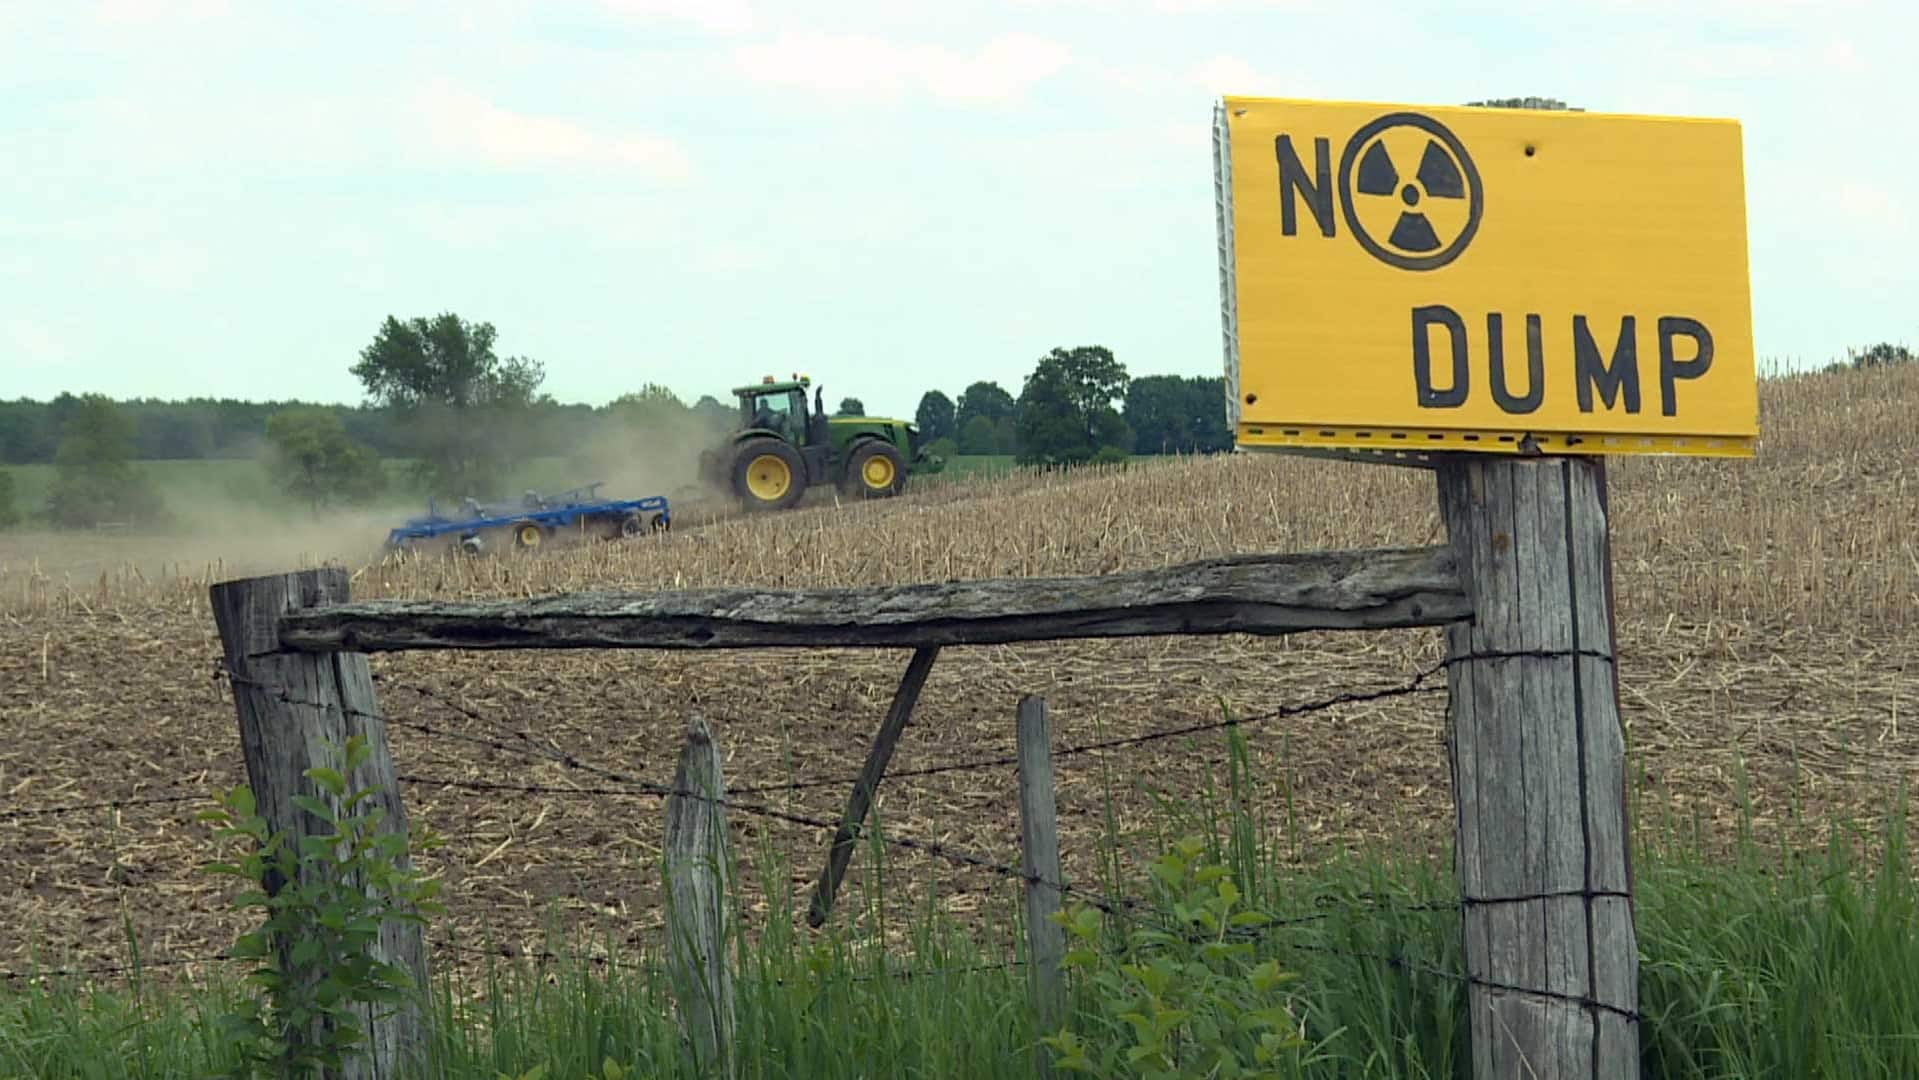 30000 shipments of nuclear waste would move through ontario cities farmland under draft plan 2